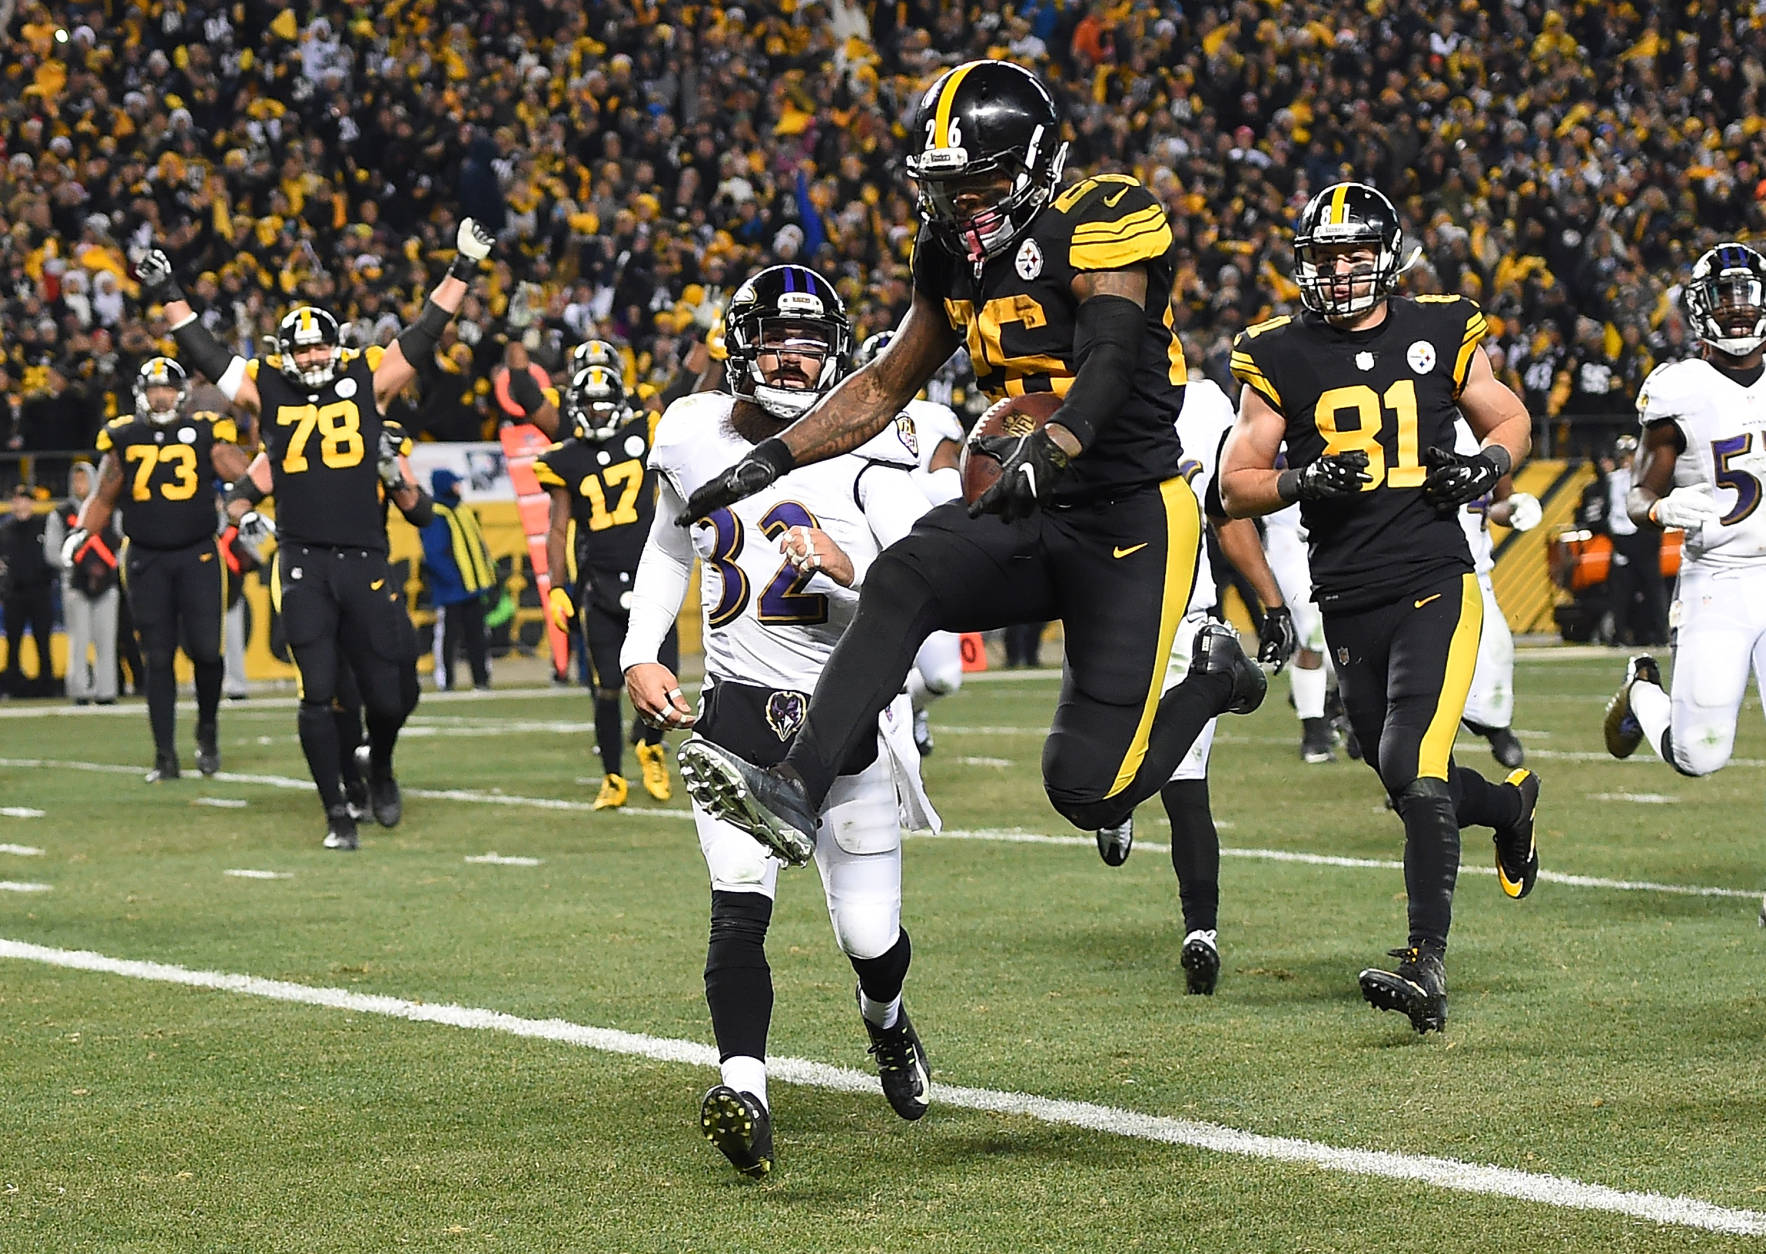 PITTSBURGH, PA - DECEMBER 25:  Le'Veon Bell #26 of the Pittsburgh Steelers leaps into the end zone in front of Eric Weddle #32 of the Baltimore Ravens for a 7 yard rushing touchdown in the fourth quarter during the game at Heinz Field on December 25, 2016 in Pittsburgh, Pennsylvania. (Photo by Joe Sargent/Getty Images)